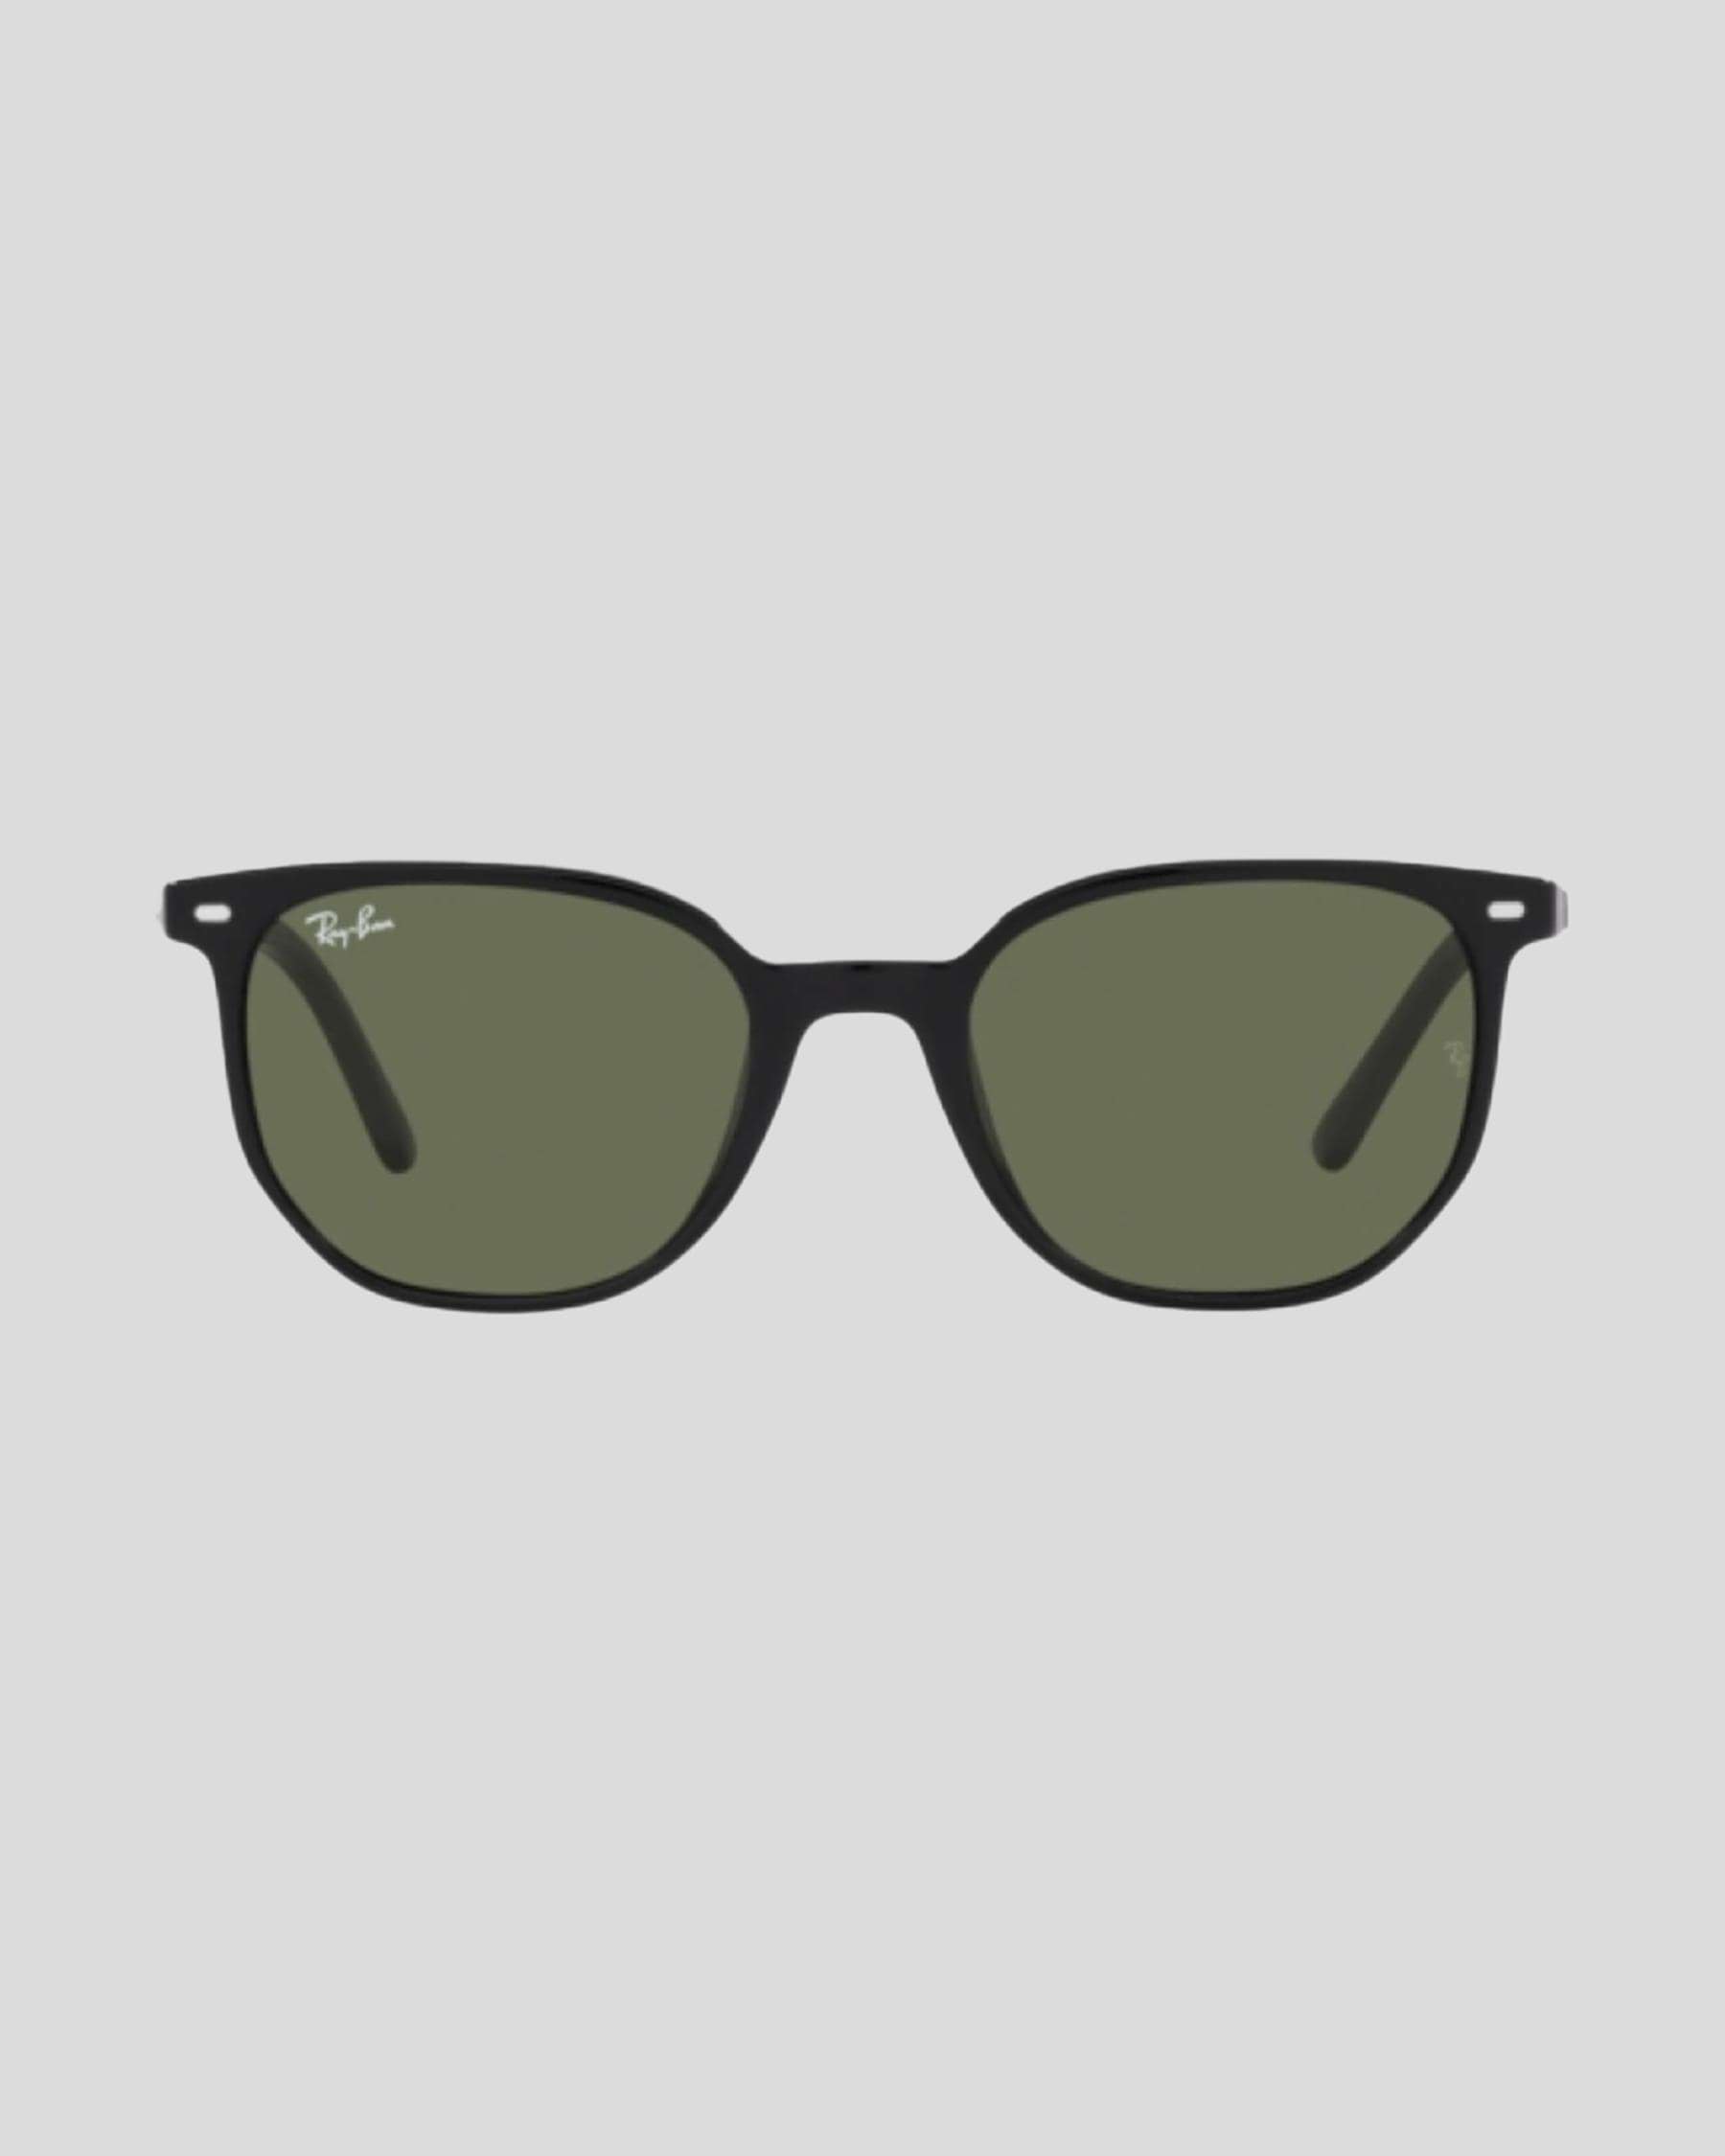 Ray-Ban Elliot Sunglasses In Black/green - FREE* Shipping & Easy ...